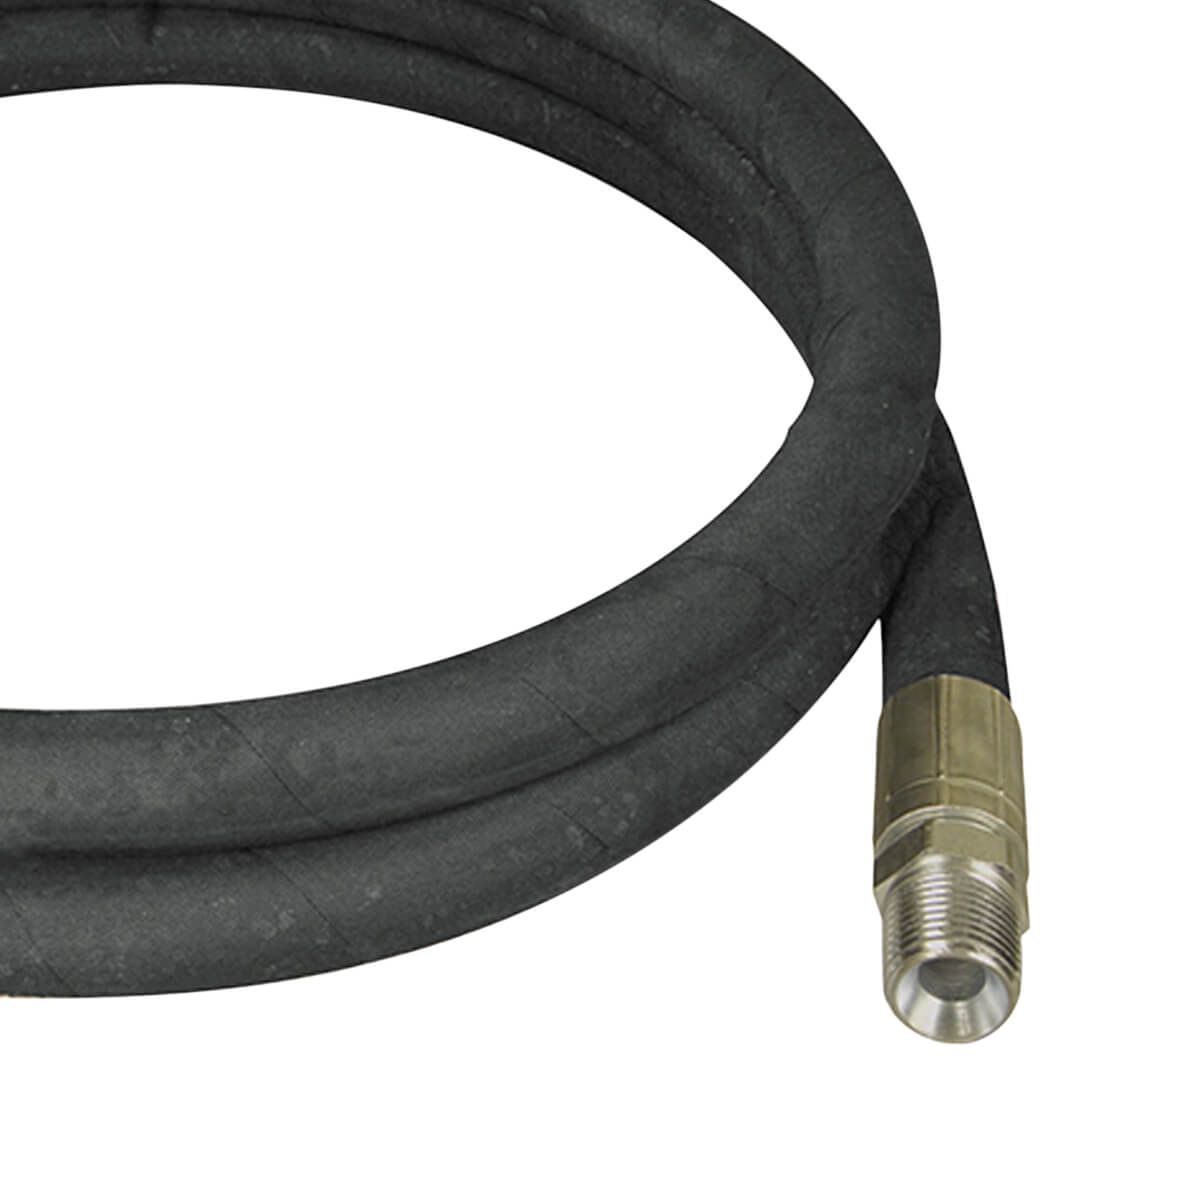 Hydraulic Hose Assembly - Male x Male - 1/4-in x 36-in